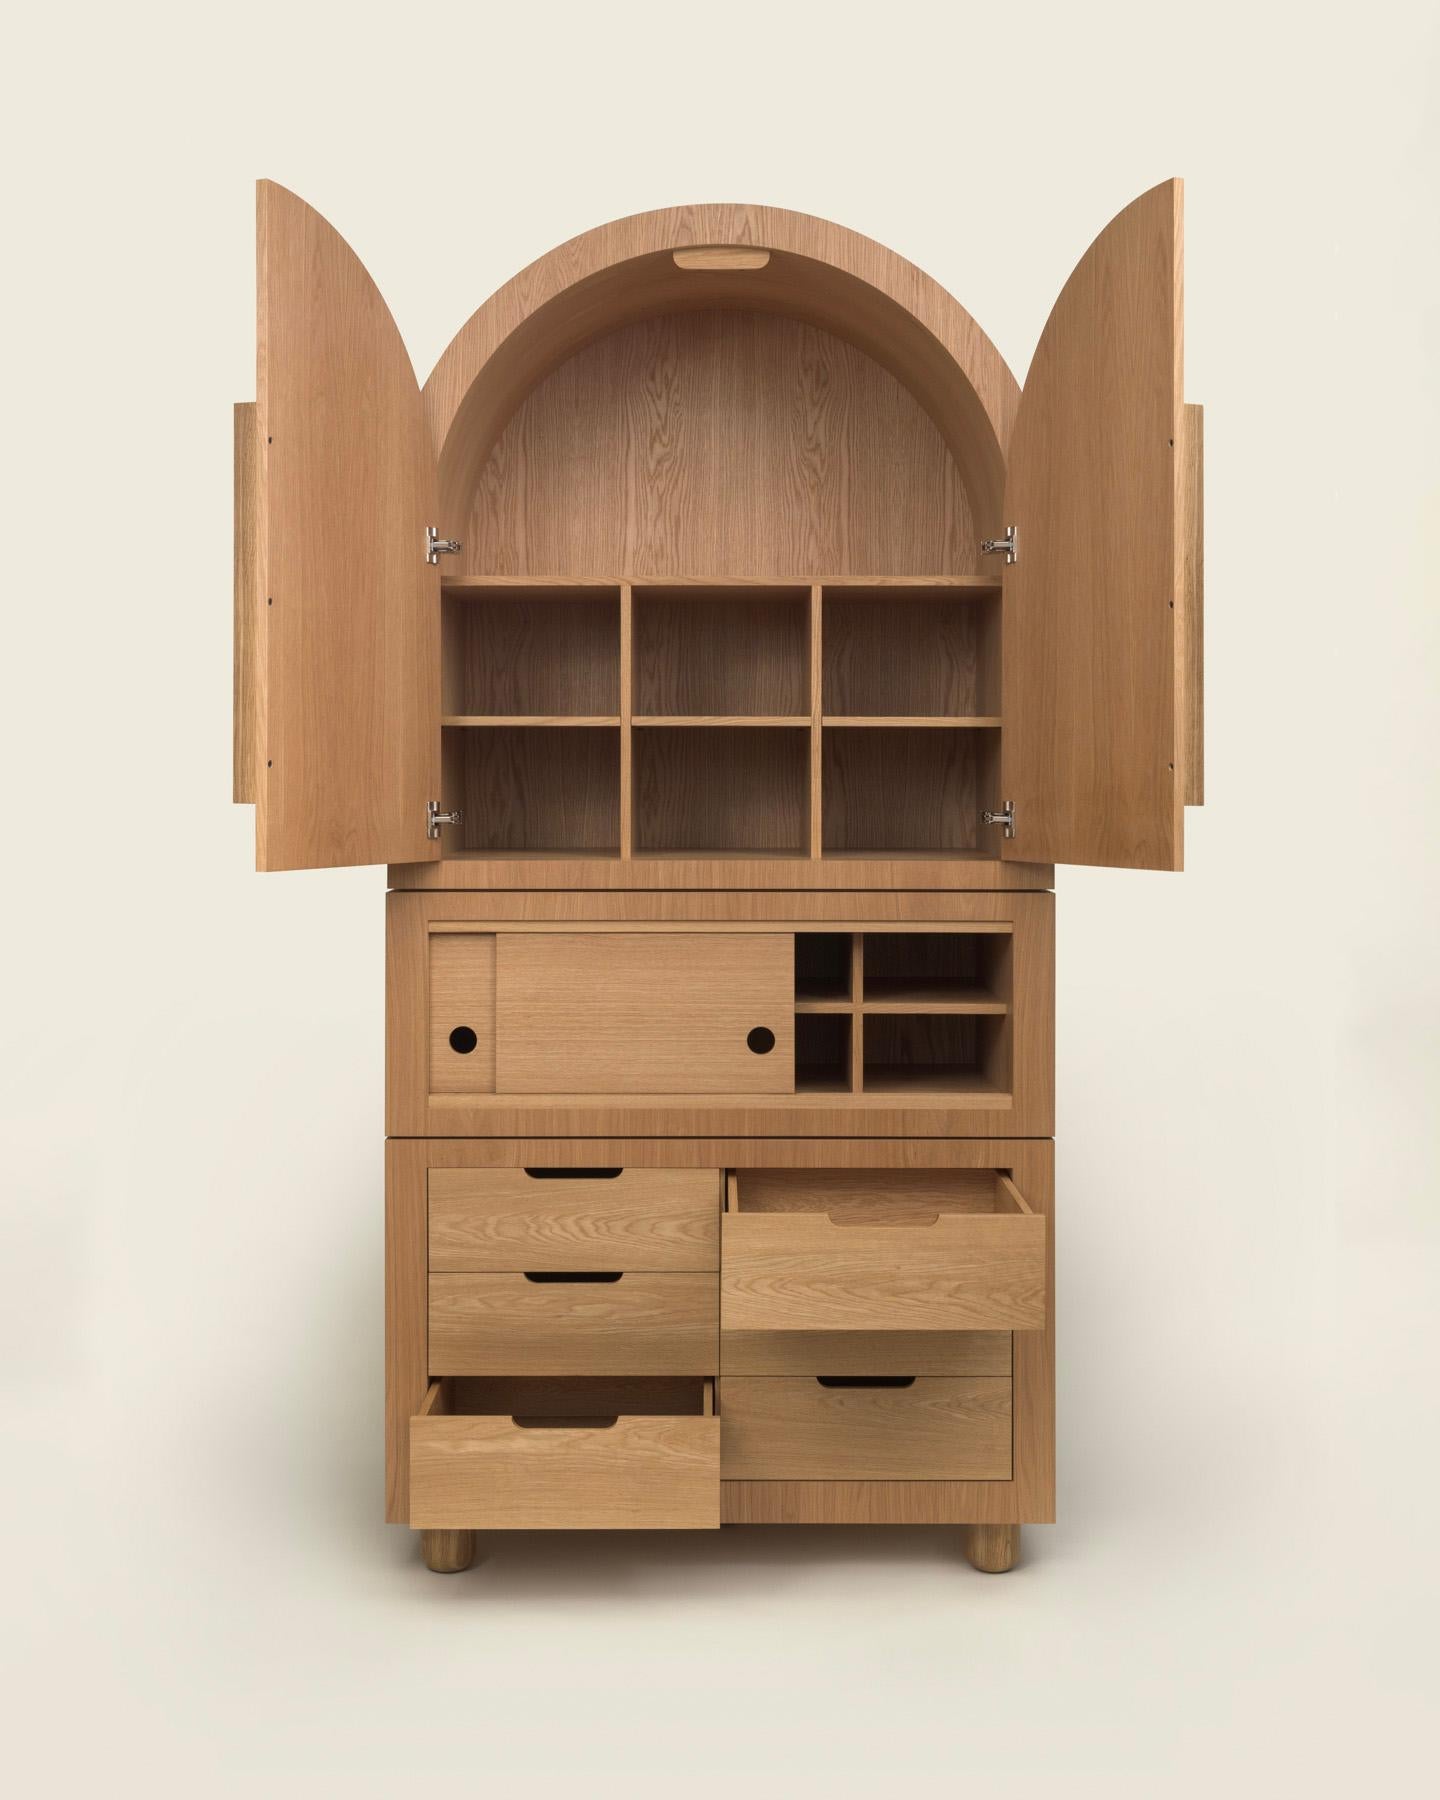 Inspired by the curves of the Art Deco movement, the Jackson Highboy was originally designed as a commission for a client in Jackson Heights, Queens. Crafted from a practical blend of solid and plywood construction, it celebrates the arch form in